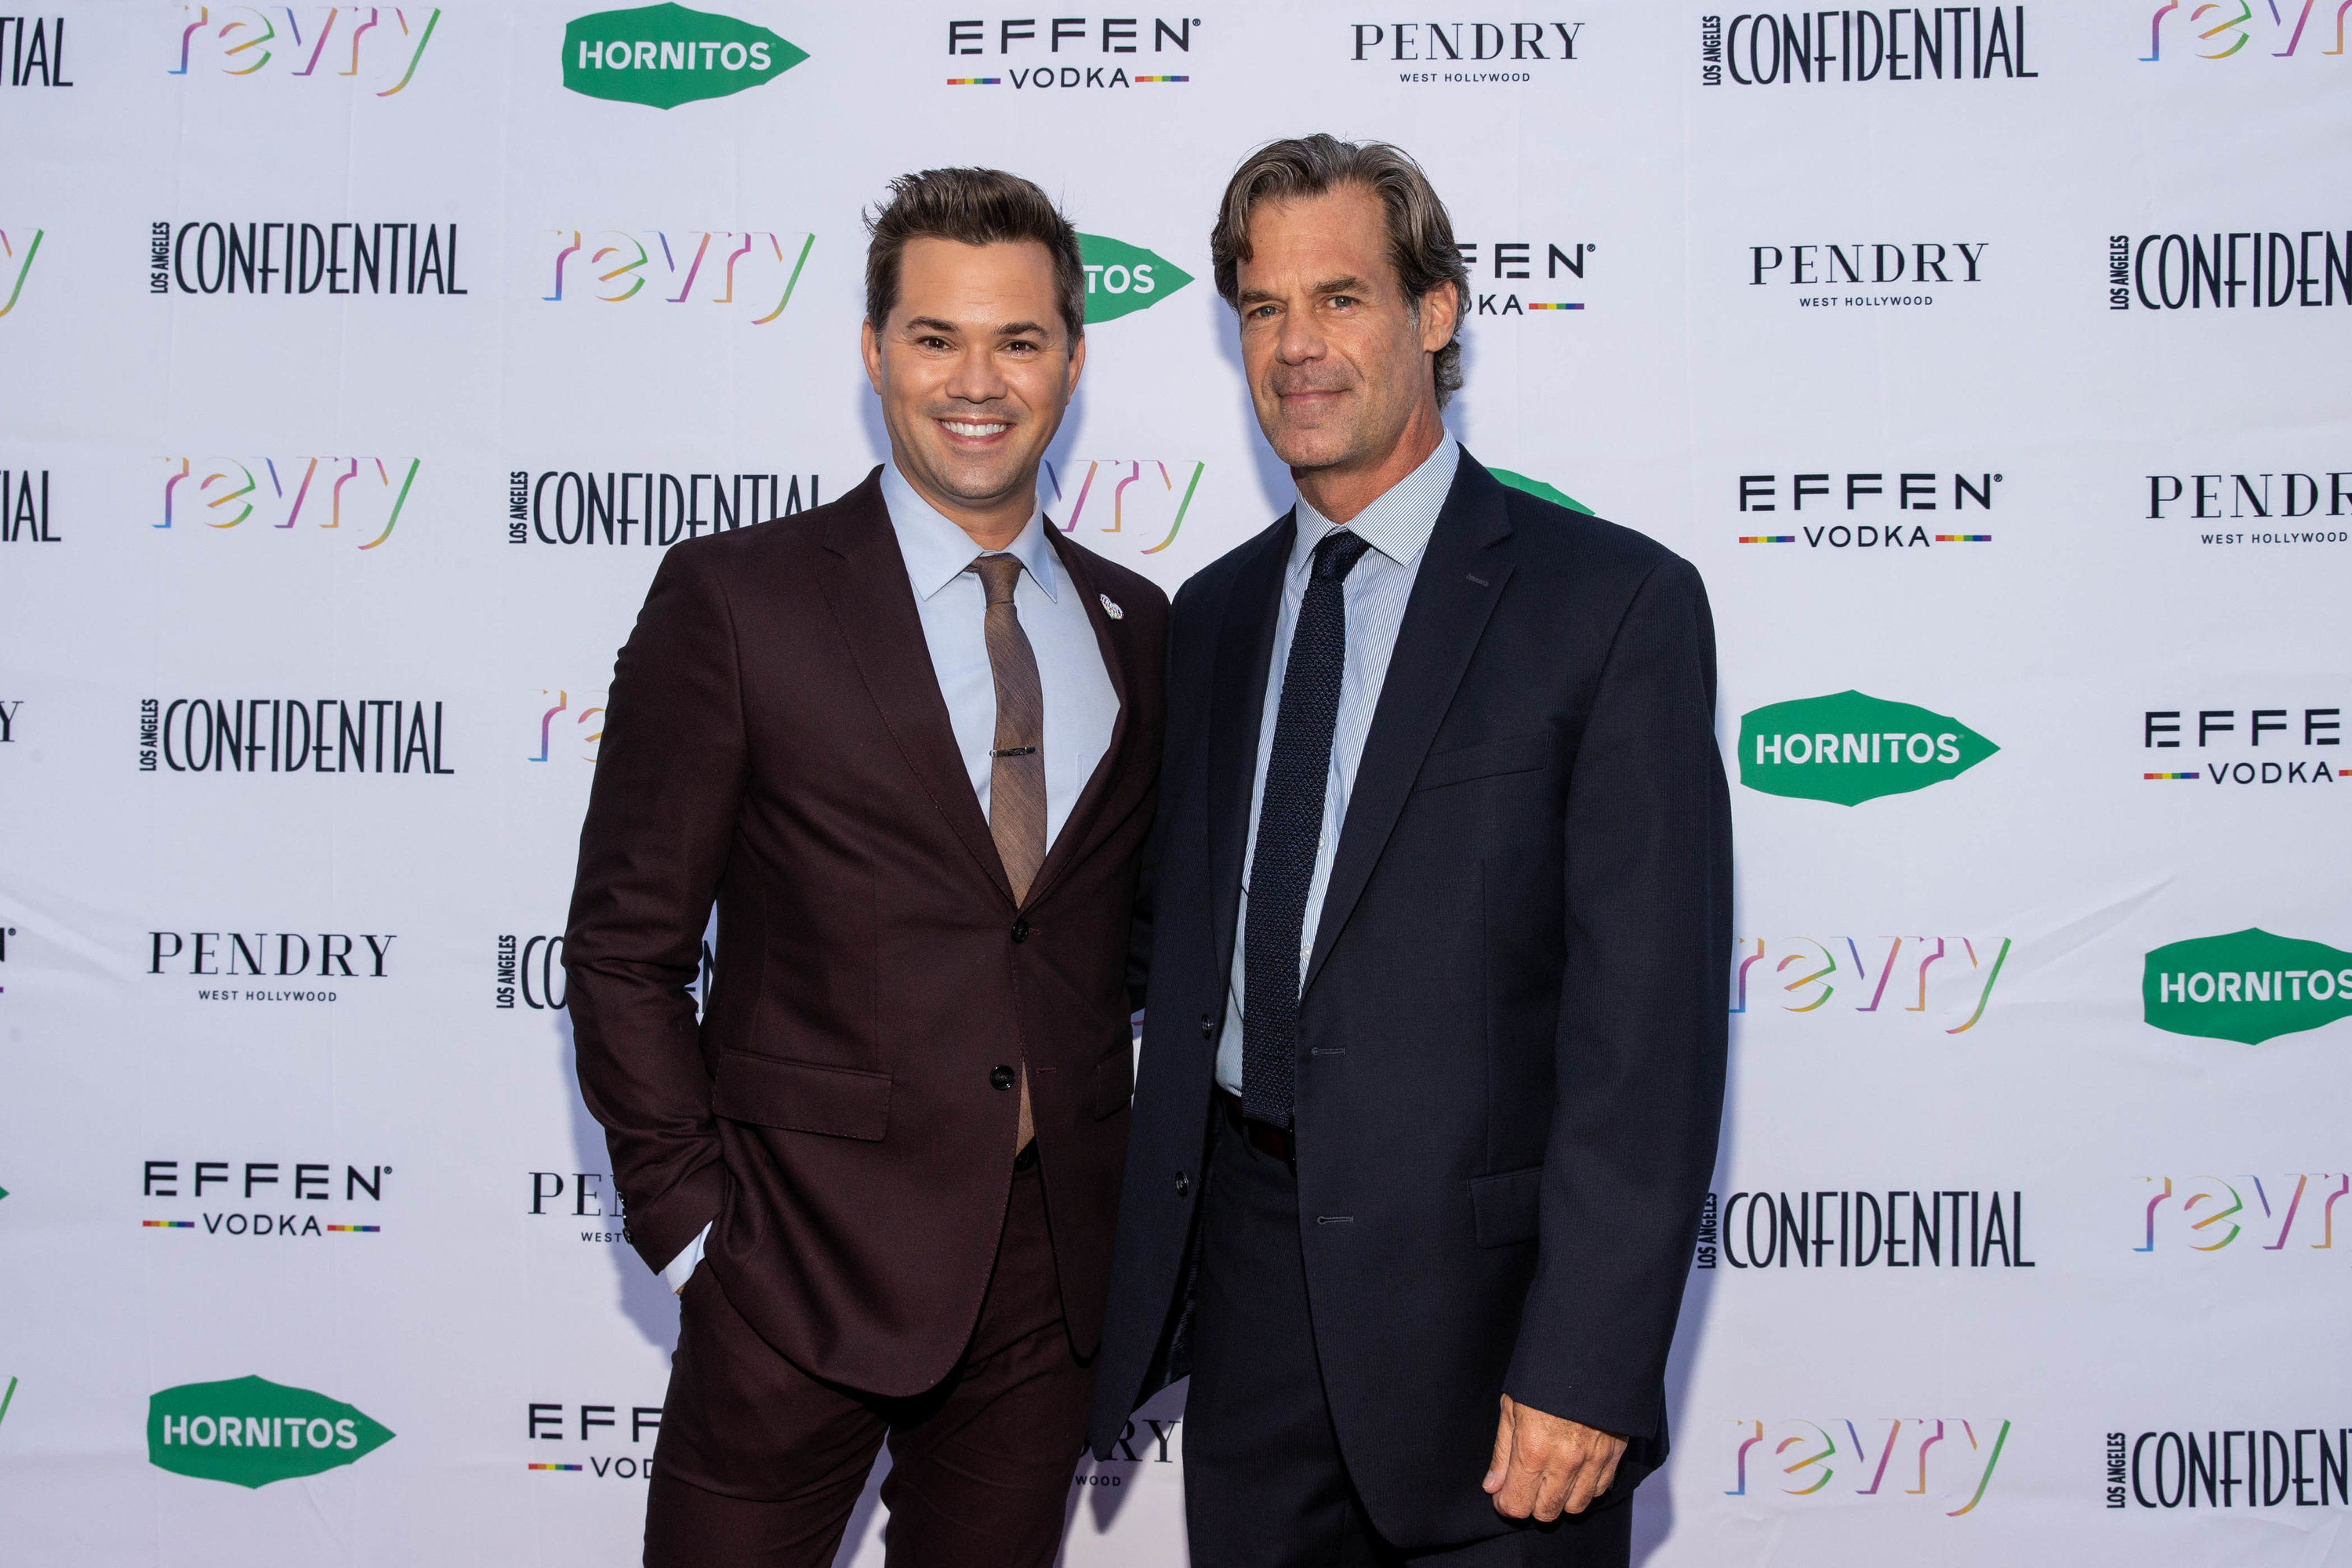 Andrew Rannells and Tuc Watkins at an event